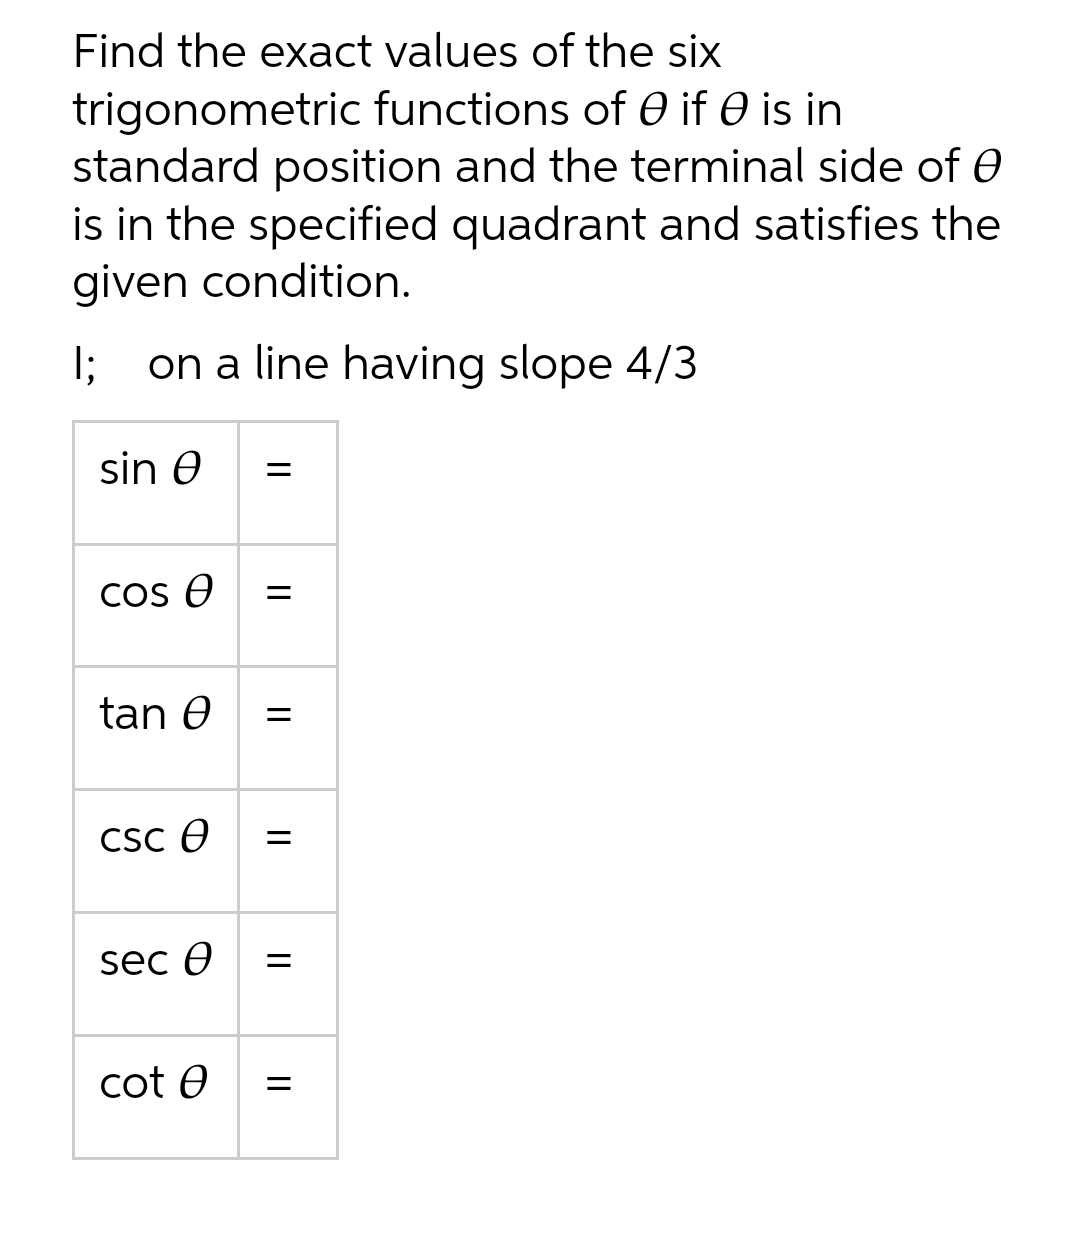 Find the exact values of the six
trigonometric functions of Ꮎ if Ꮎ is in
standard position and the terminal side of
is in the specified quadrant and satisfies the
given condition.
I; on a line having slope 4/3
sin Ꮎ =
cos Ꮎ =
tan Ꮎ =
CSC 0
sec Ꮎ
cot e
=
=
=